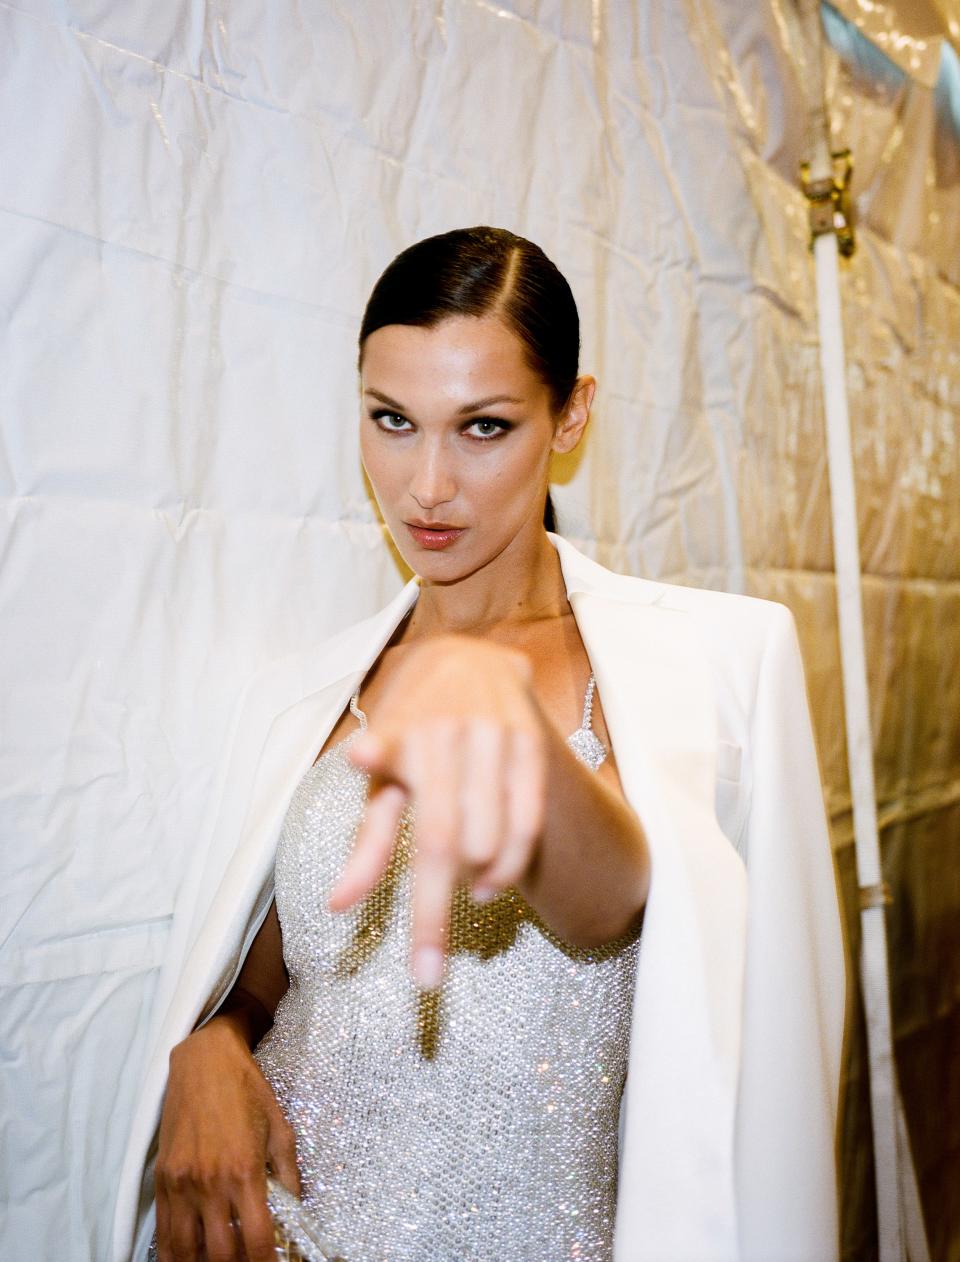 Hunter Abrams Photographs the Supermodels and the Scene at Michael Kors’s 40th Anniversary Show